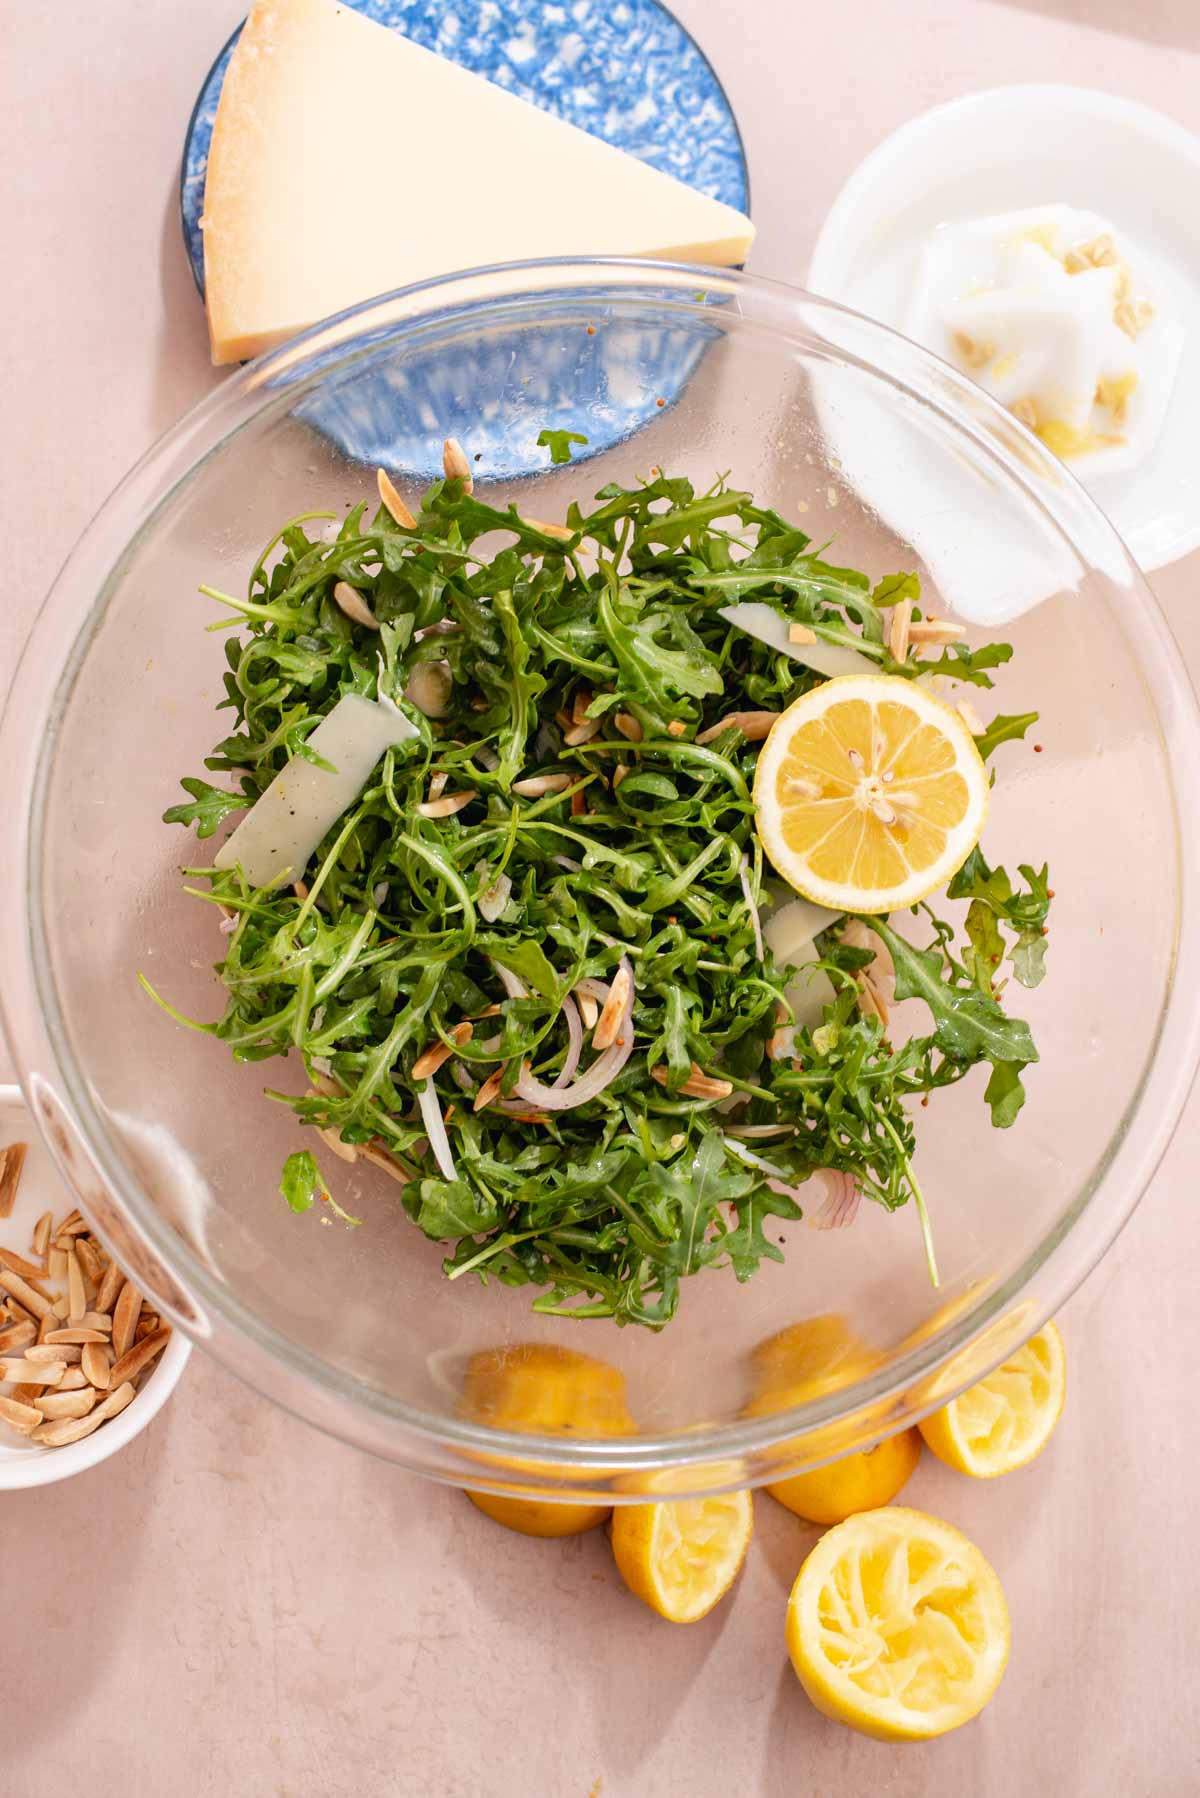 Overhead view of large glass bowl filled with arugula salad.